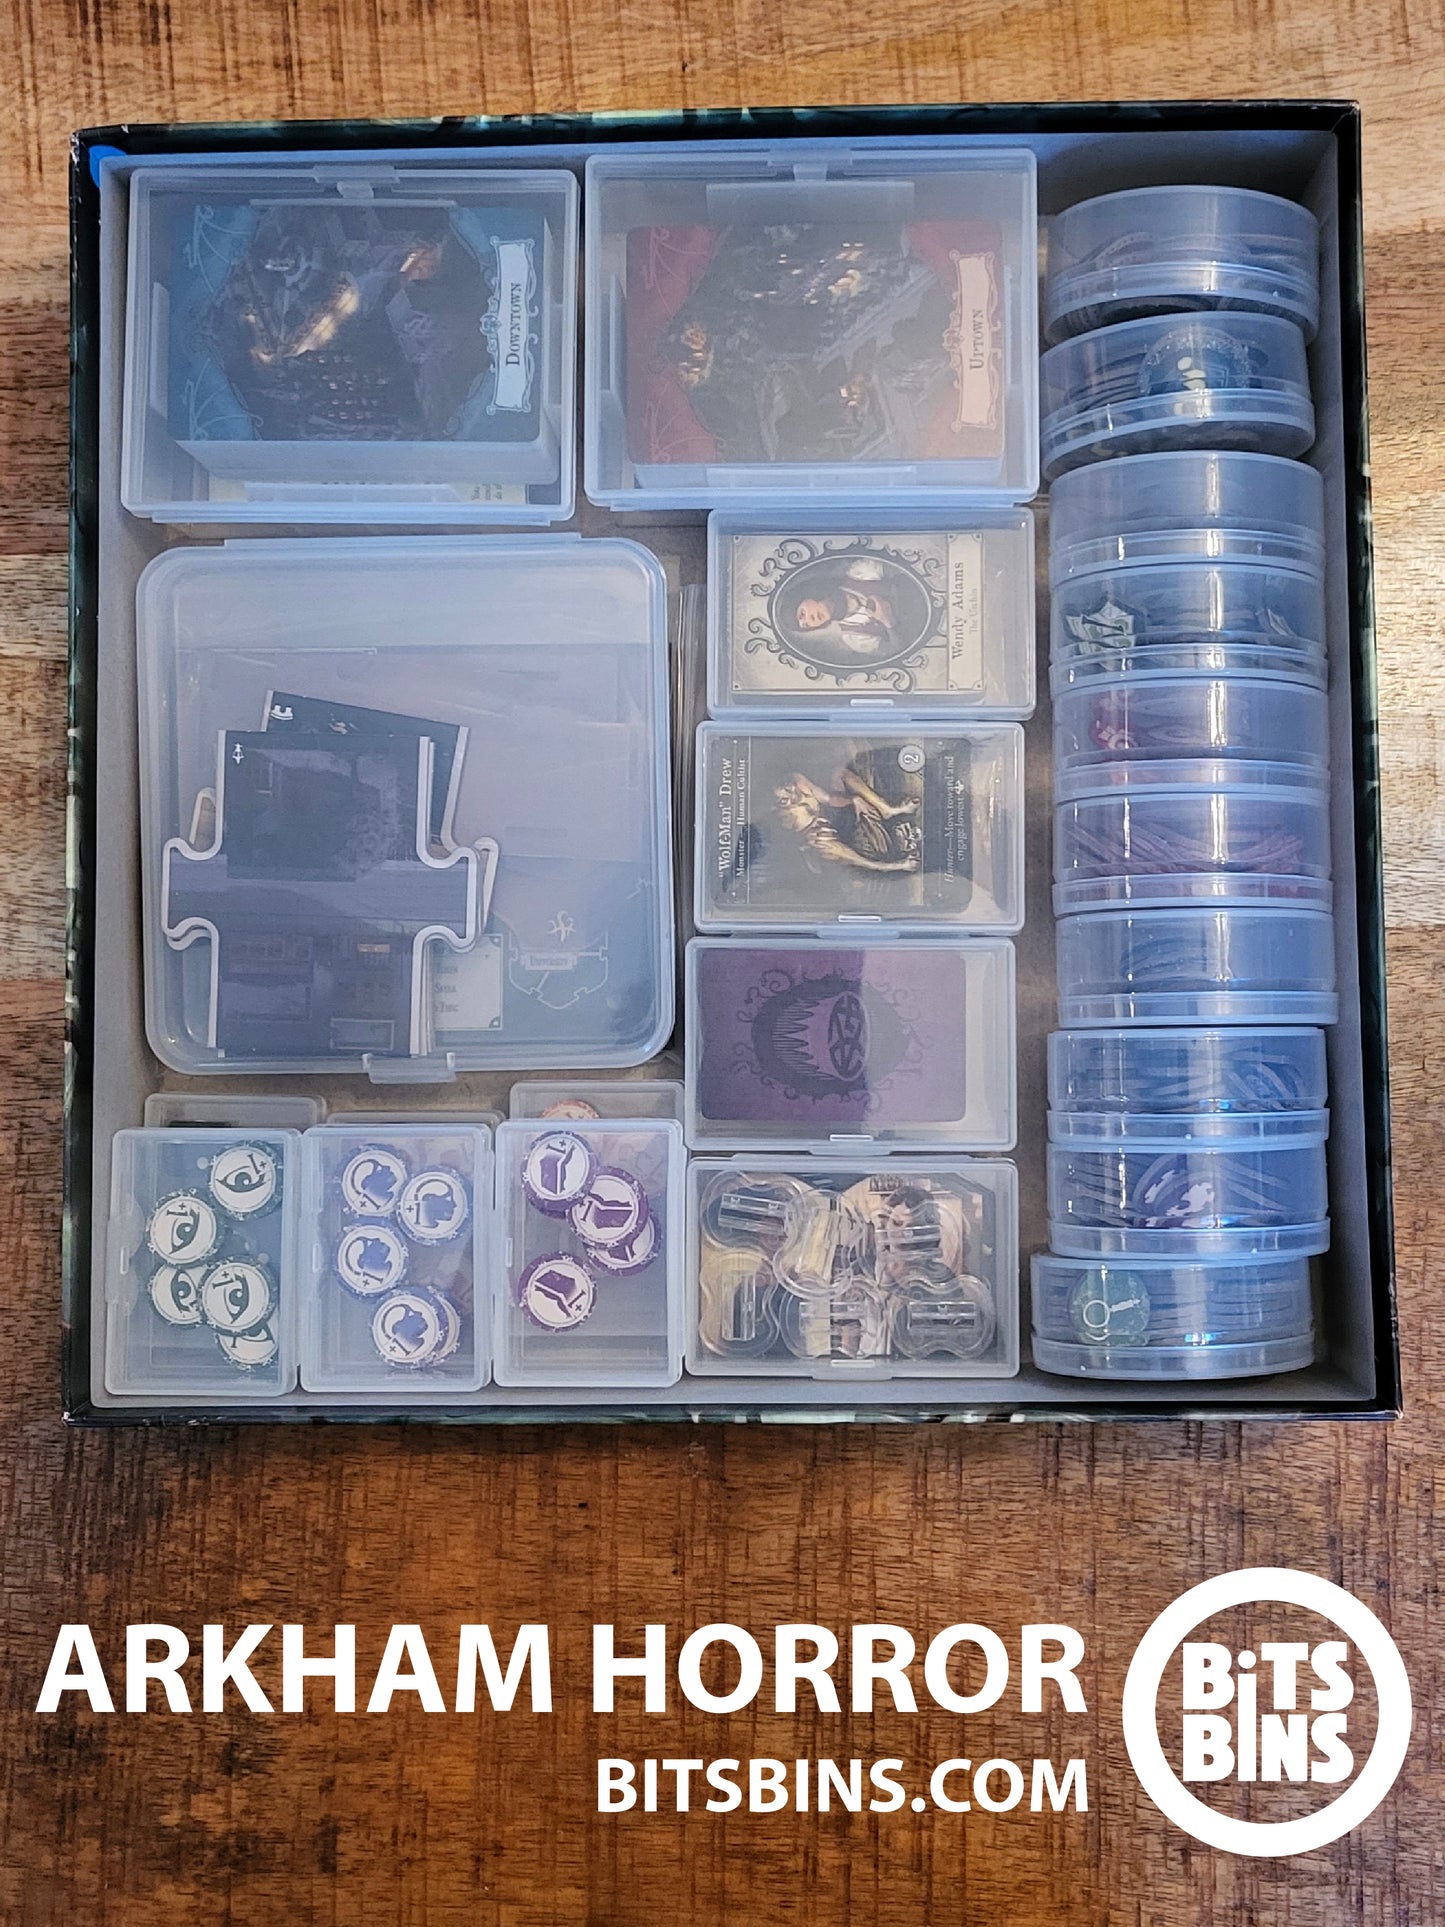 RECOMMENDED Bitsbins Arkham Horror (3rd Edition) - 10 Pods, 6 Minis, 4 Originals, 2 100+ Card Boxes, 1 Flat